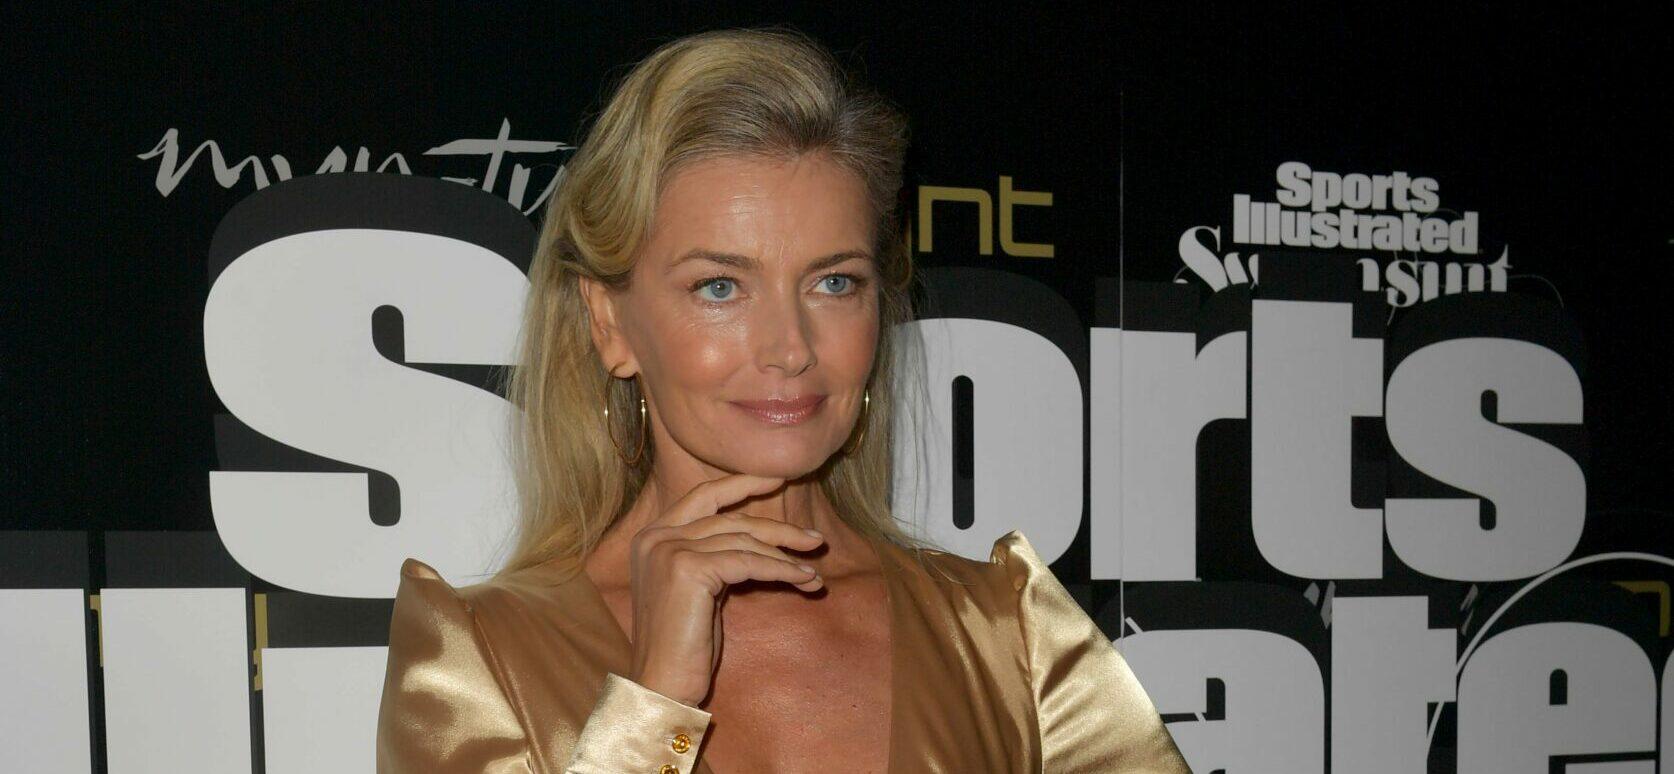 Paulina Porizkova Fires Back Against ‘Unkind’ Instagram Comments